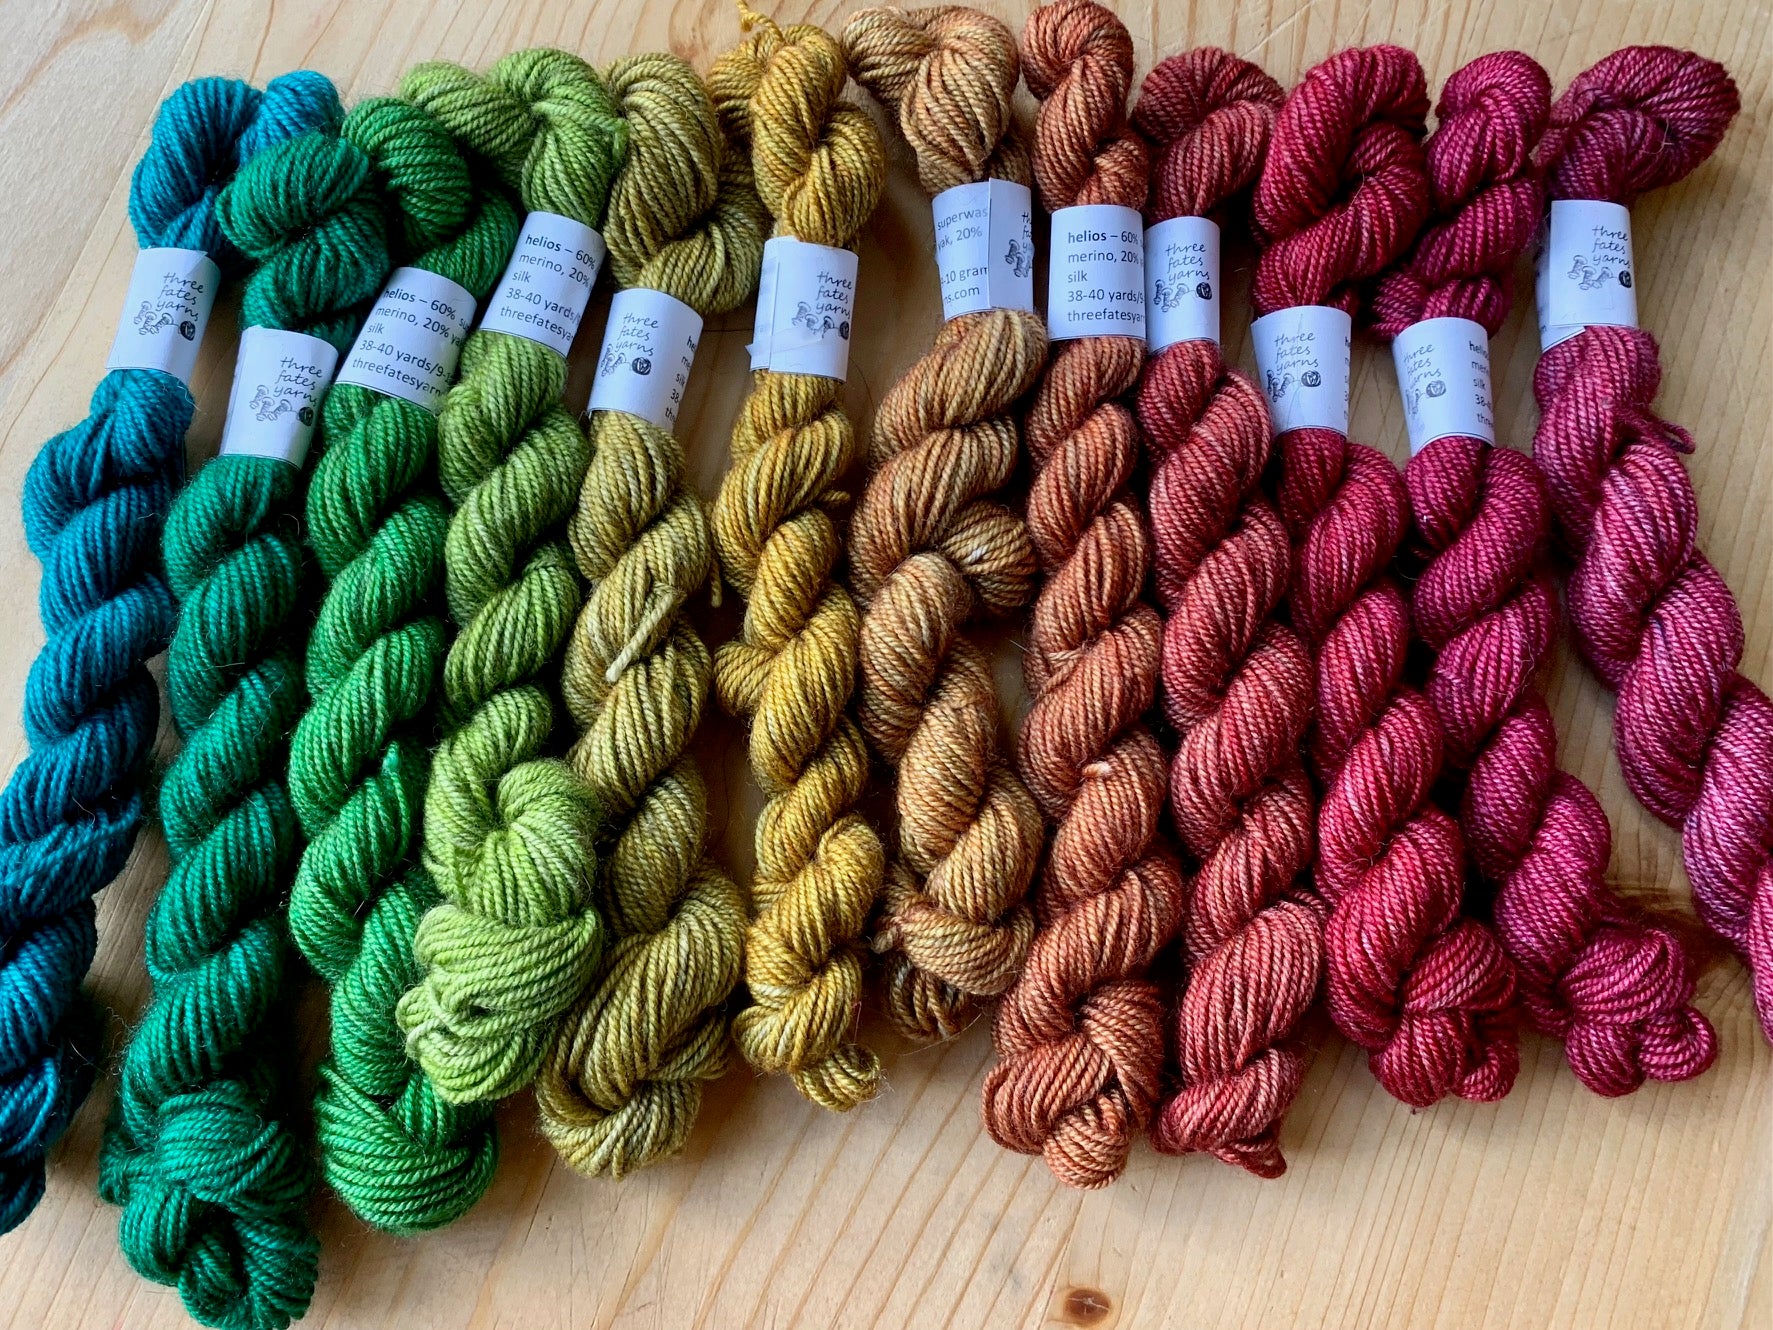 12 color helios mini skein sets (contrast skeins not included)